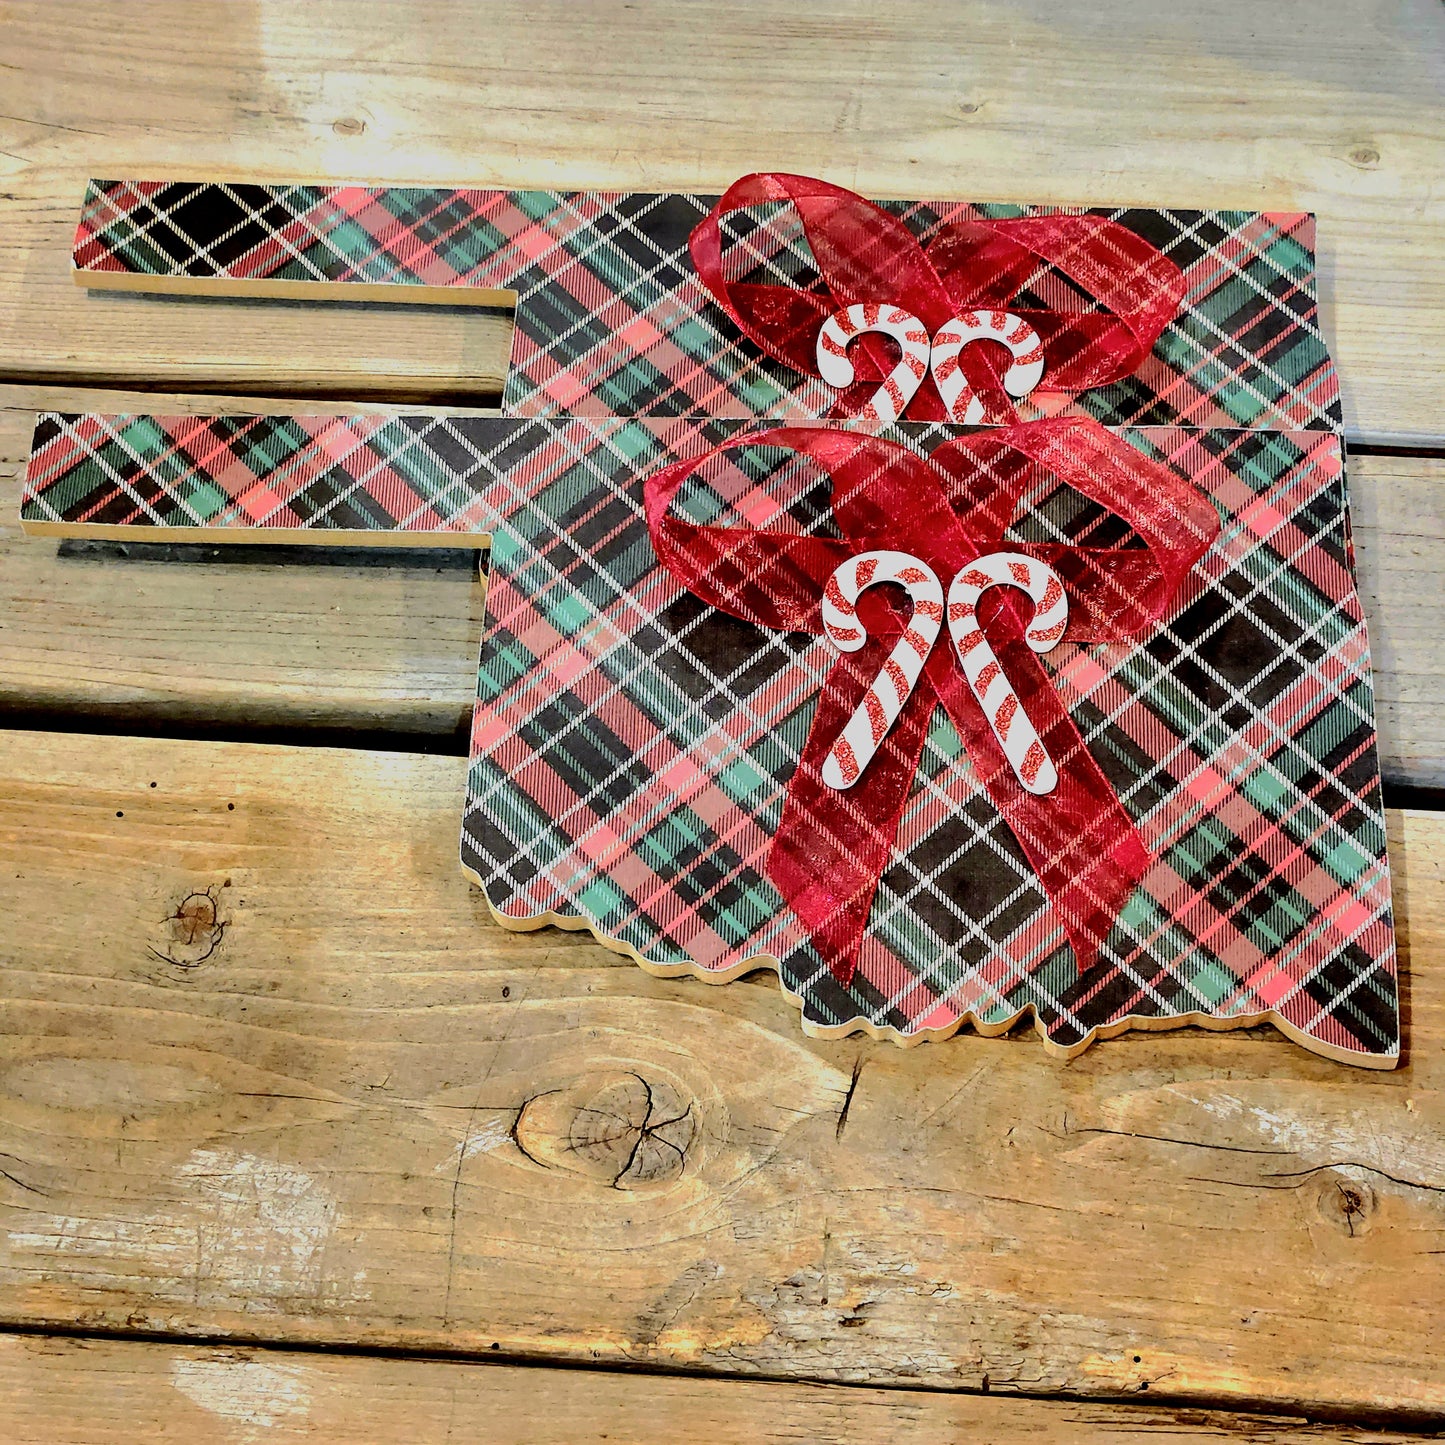 Wooden Oklahoma shape covered in plaid design with bow and candy cane accents.